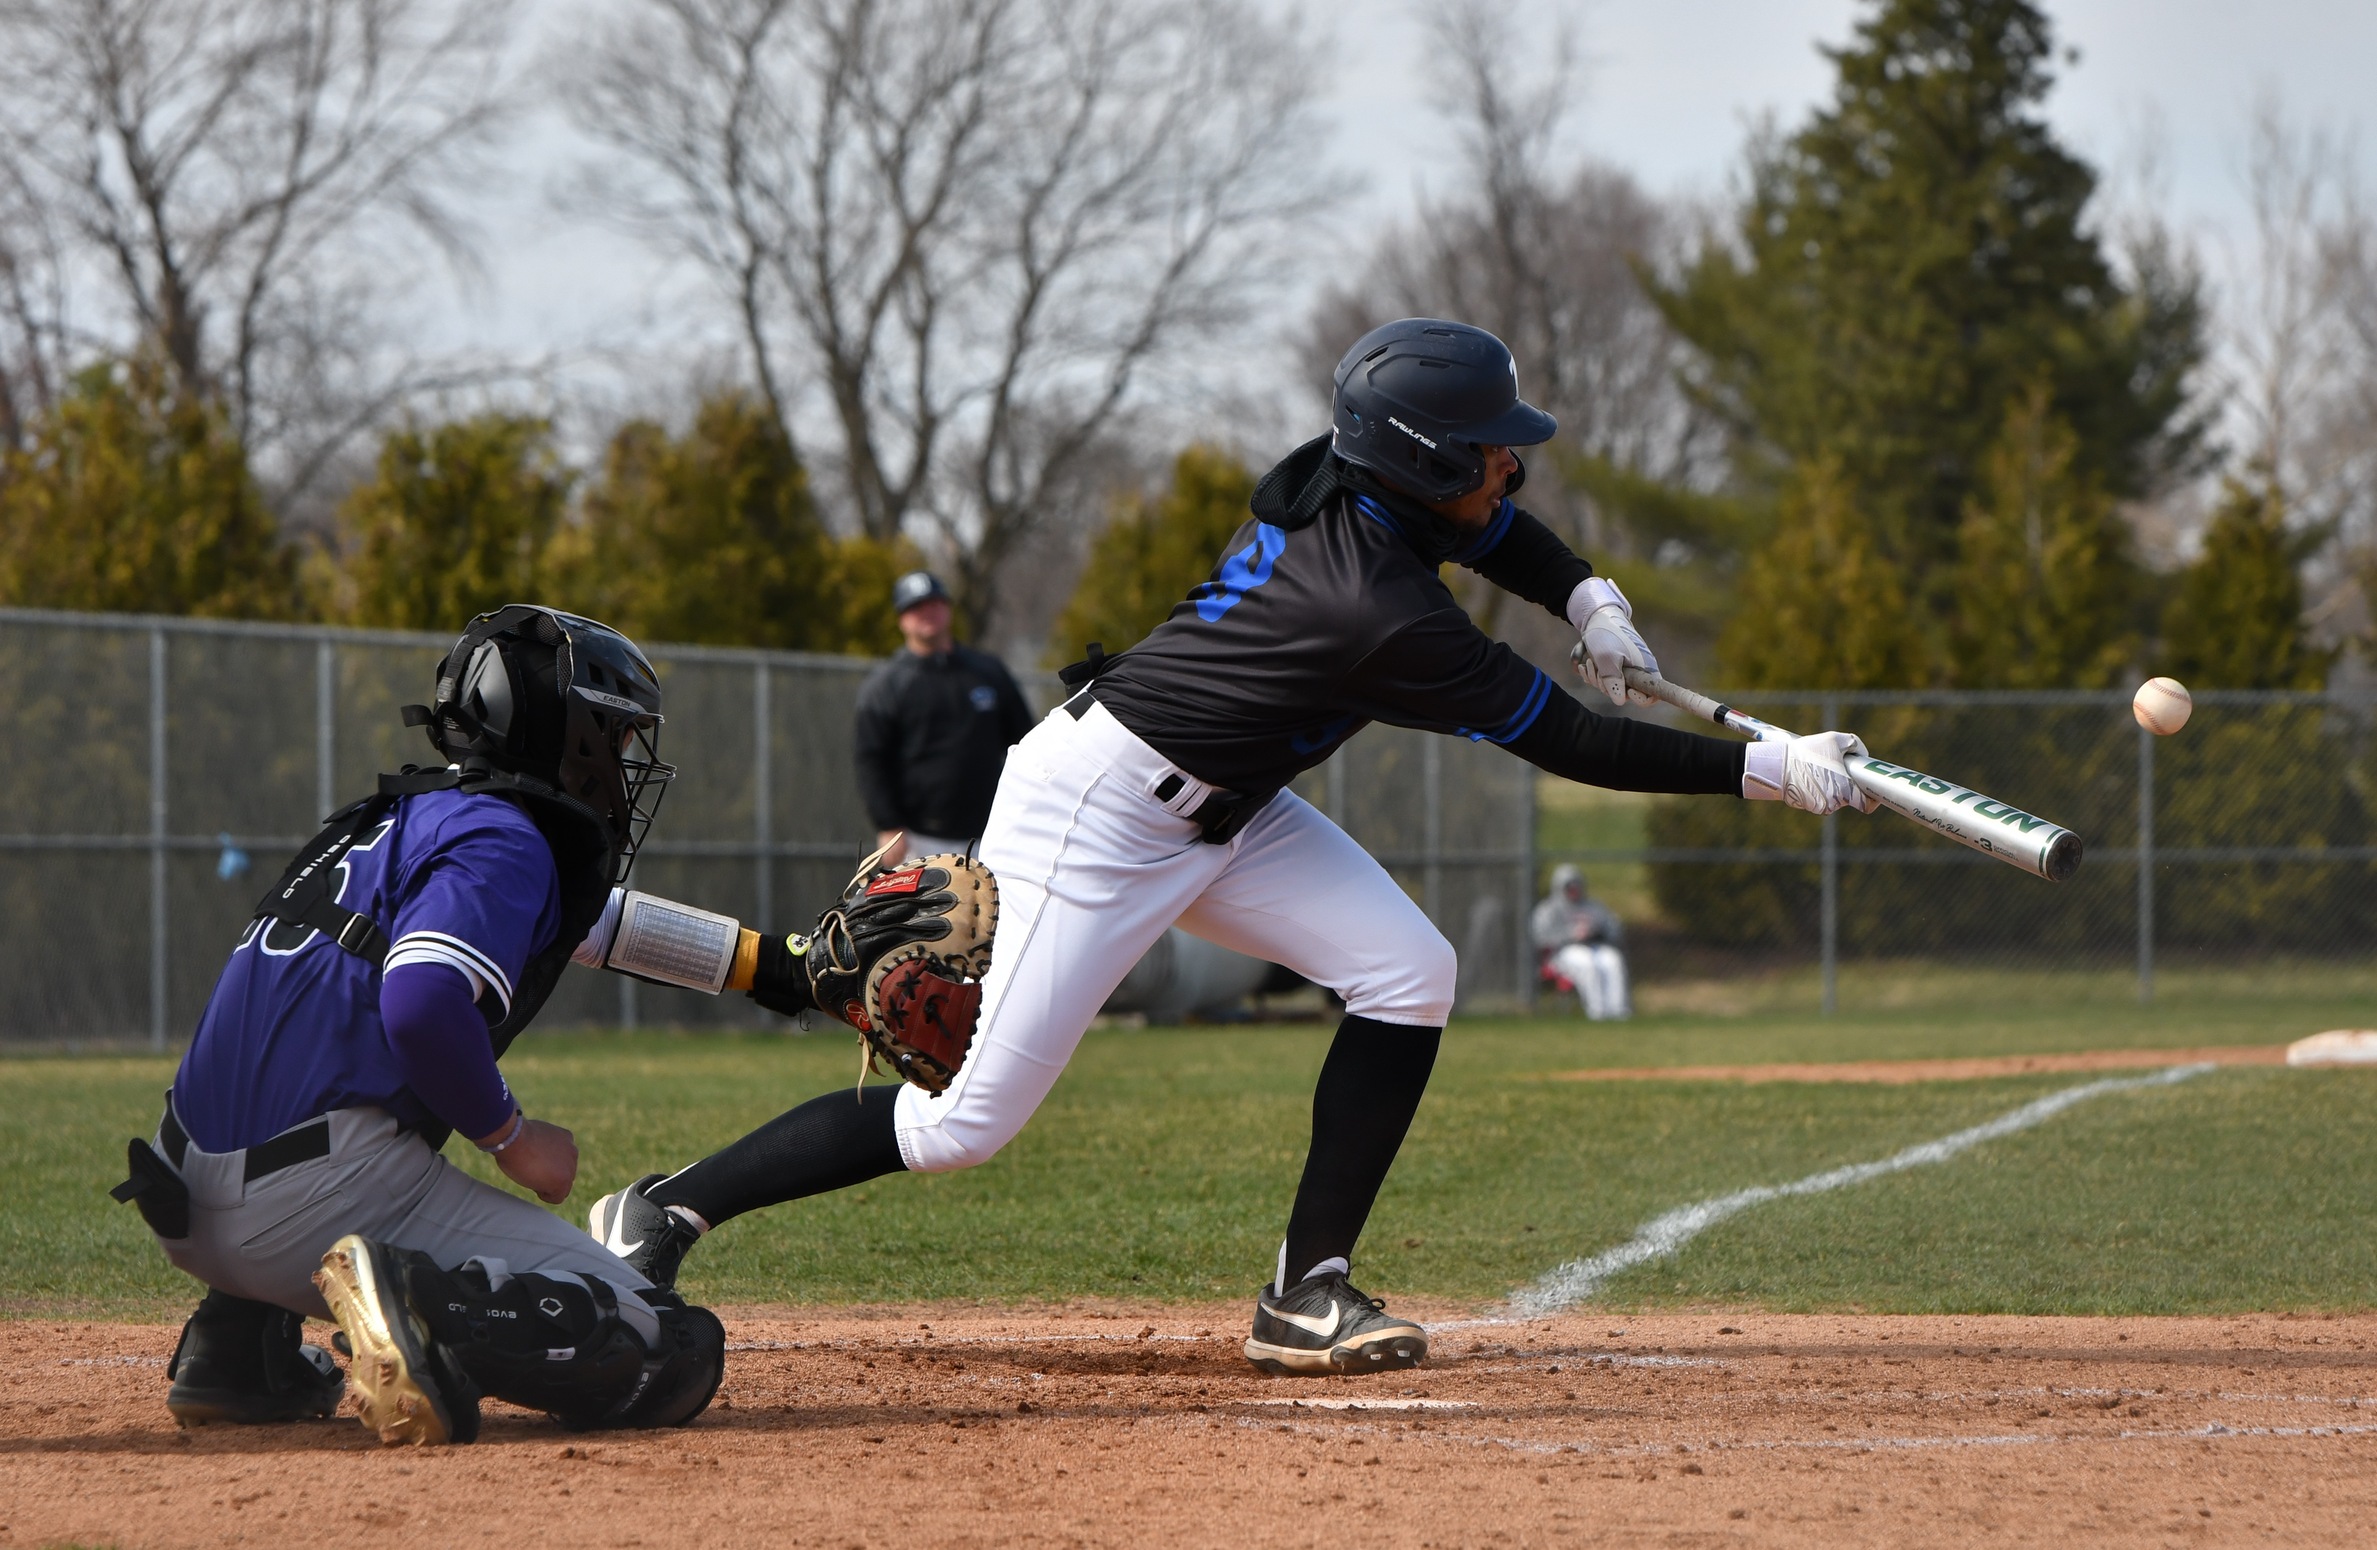 DMACC baseball team takes two of three from IHCC